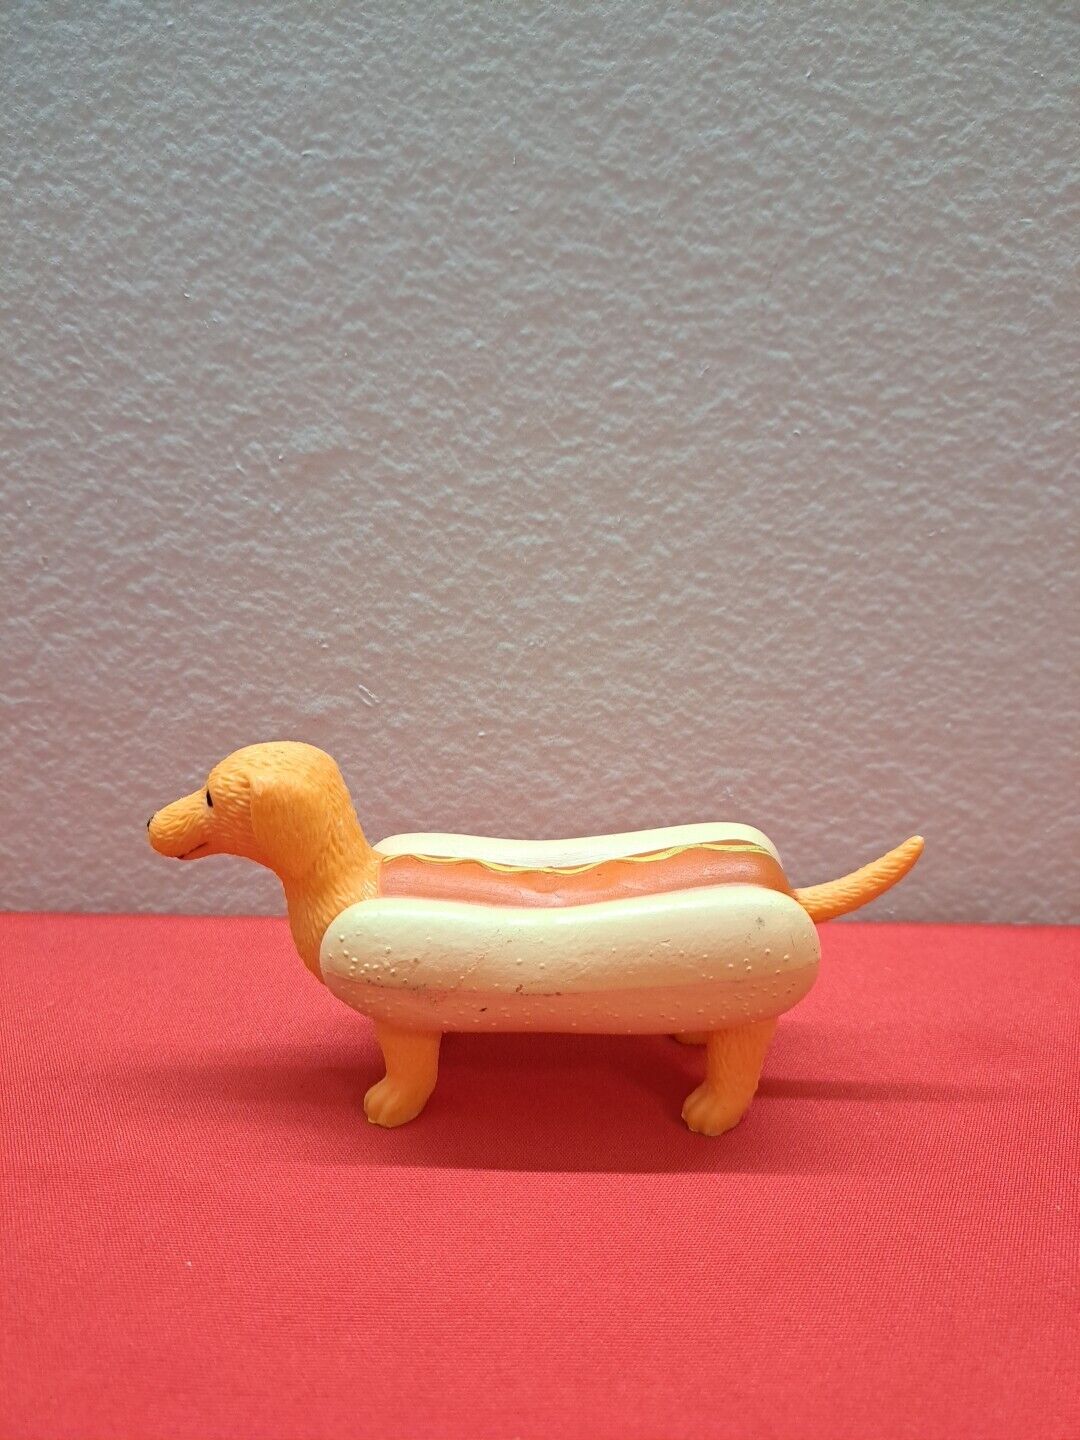 Ankyo Dachshund Hot Dog With Mustard Fig 073122, Pre-owned